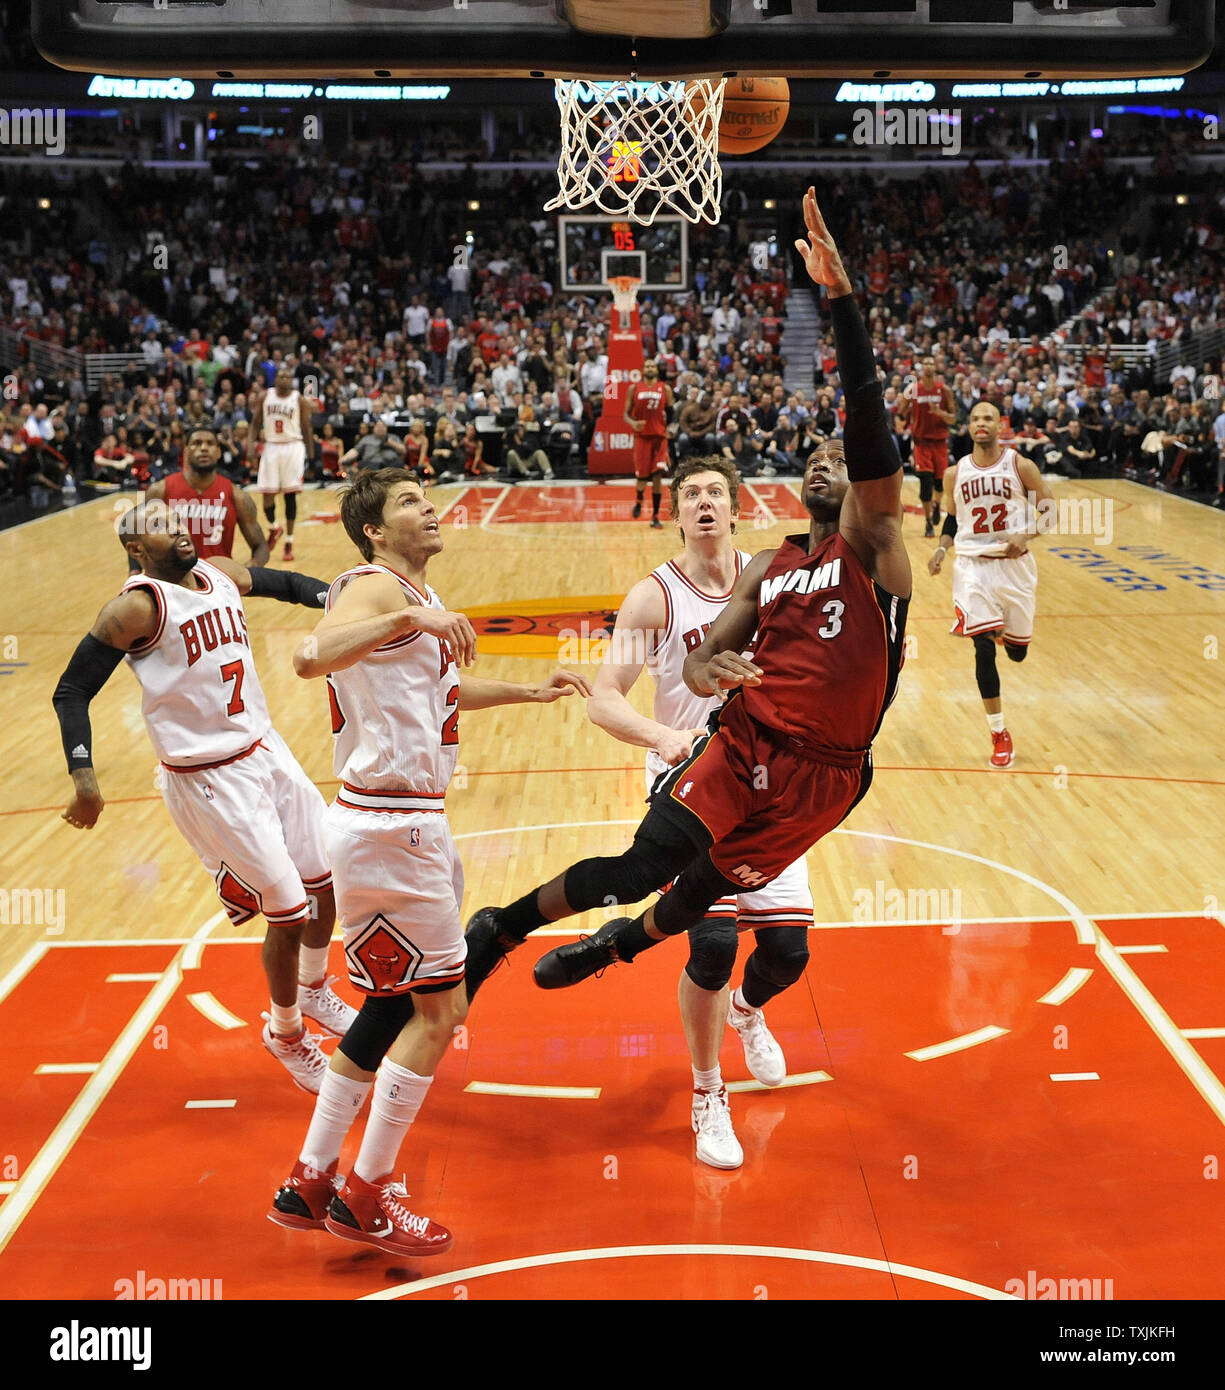 Miami Heat shooting guard Dwyane Wade (R) goes up for a layup as Chicago Bulls guard C.J. Watson (L-R), forward Kyle Korver and center Omer Asik of Turkey defend during the second half at the United Center on April 12, 2012 in Chicago. The Bulls won 96-86 in overtime.     UPI/Brian Kersey Stock Photo